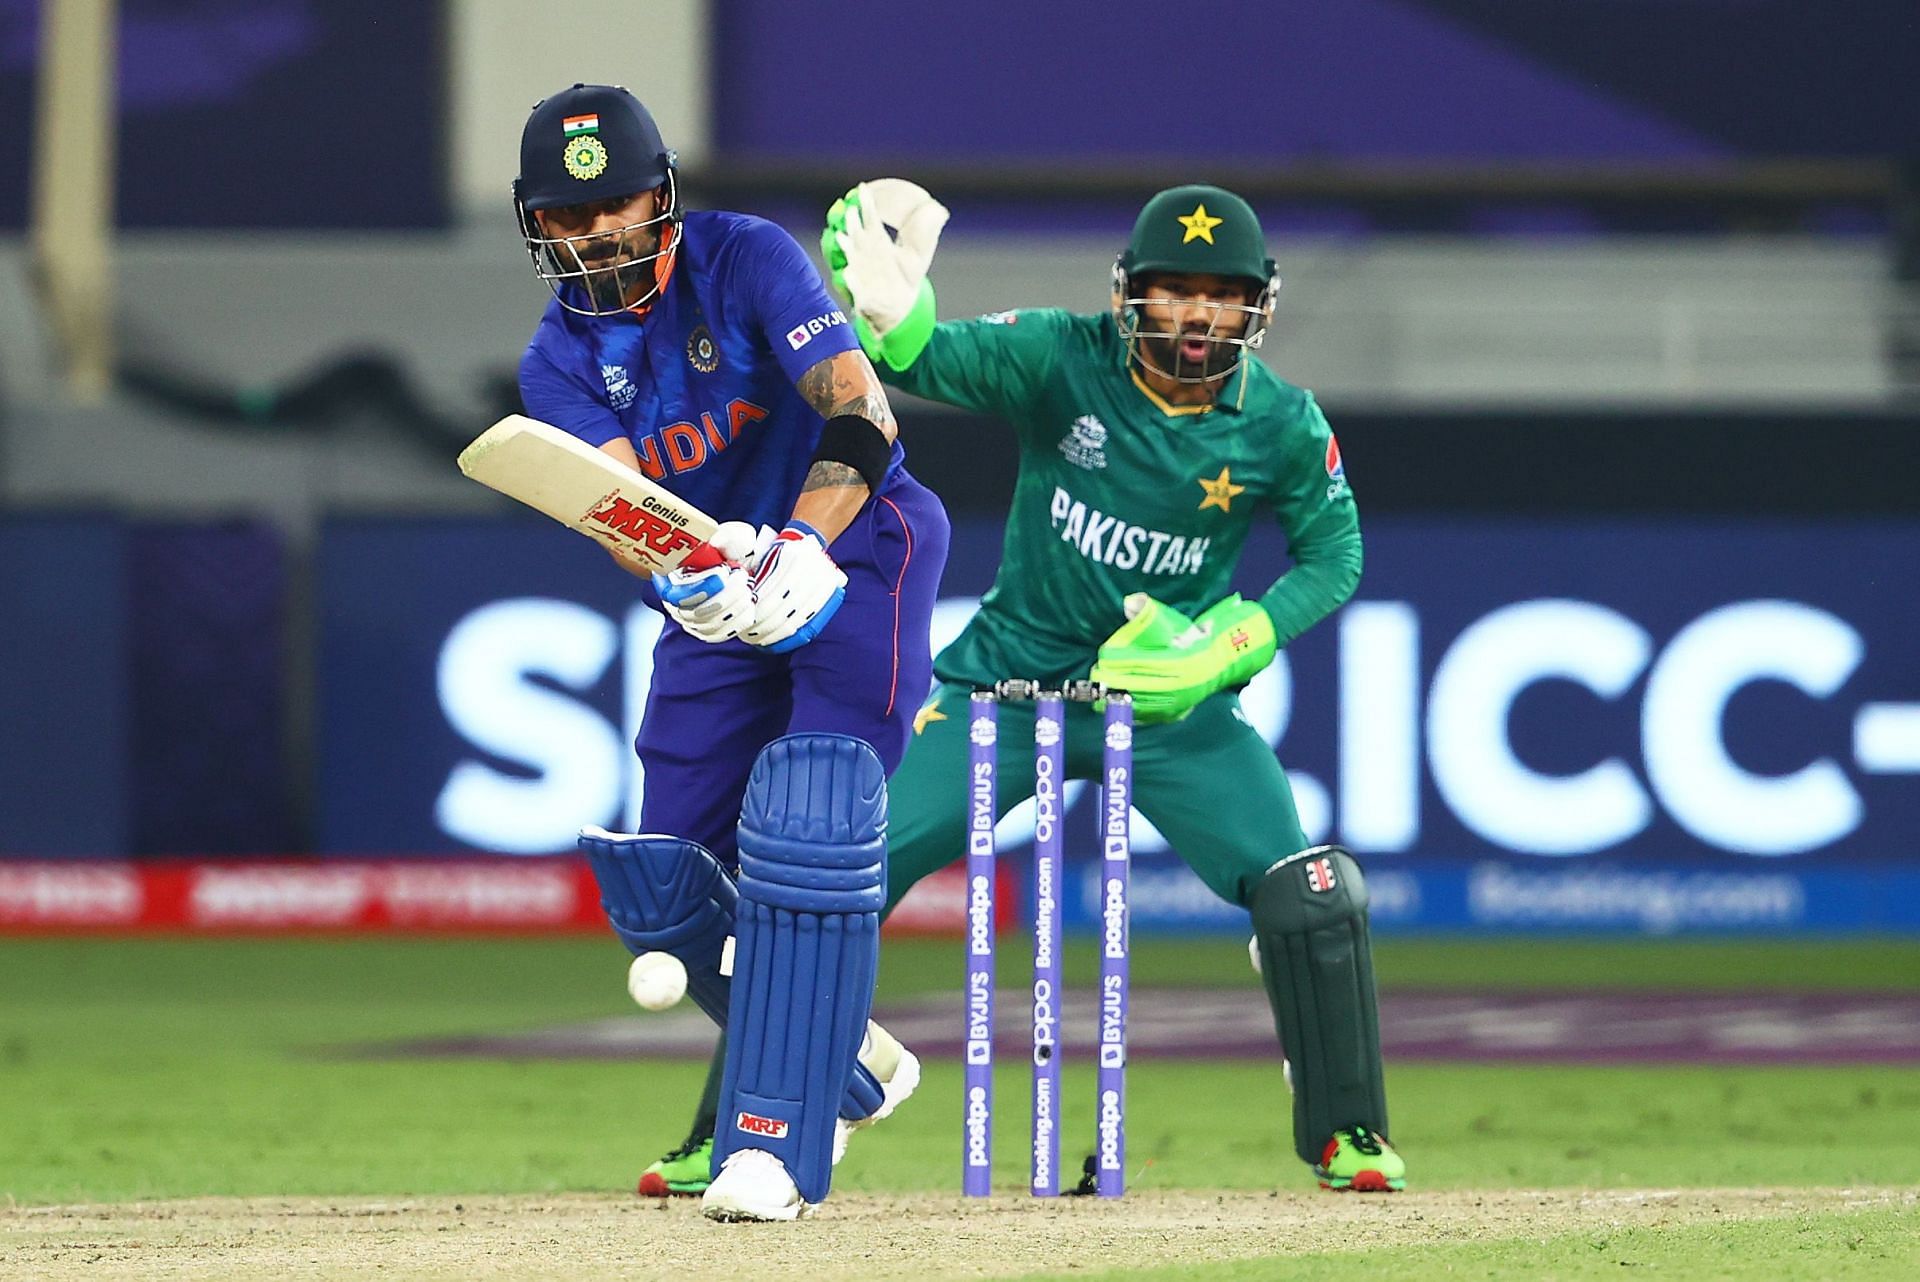 IND vs PAK T20I headtohead stats ahead of their Asia Cup 2022 match